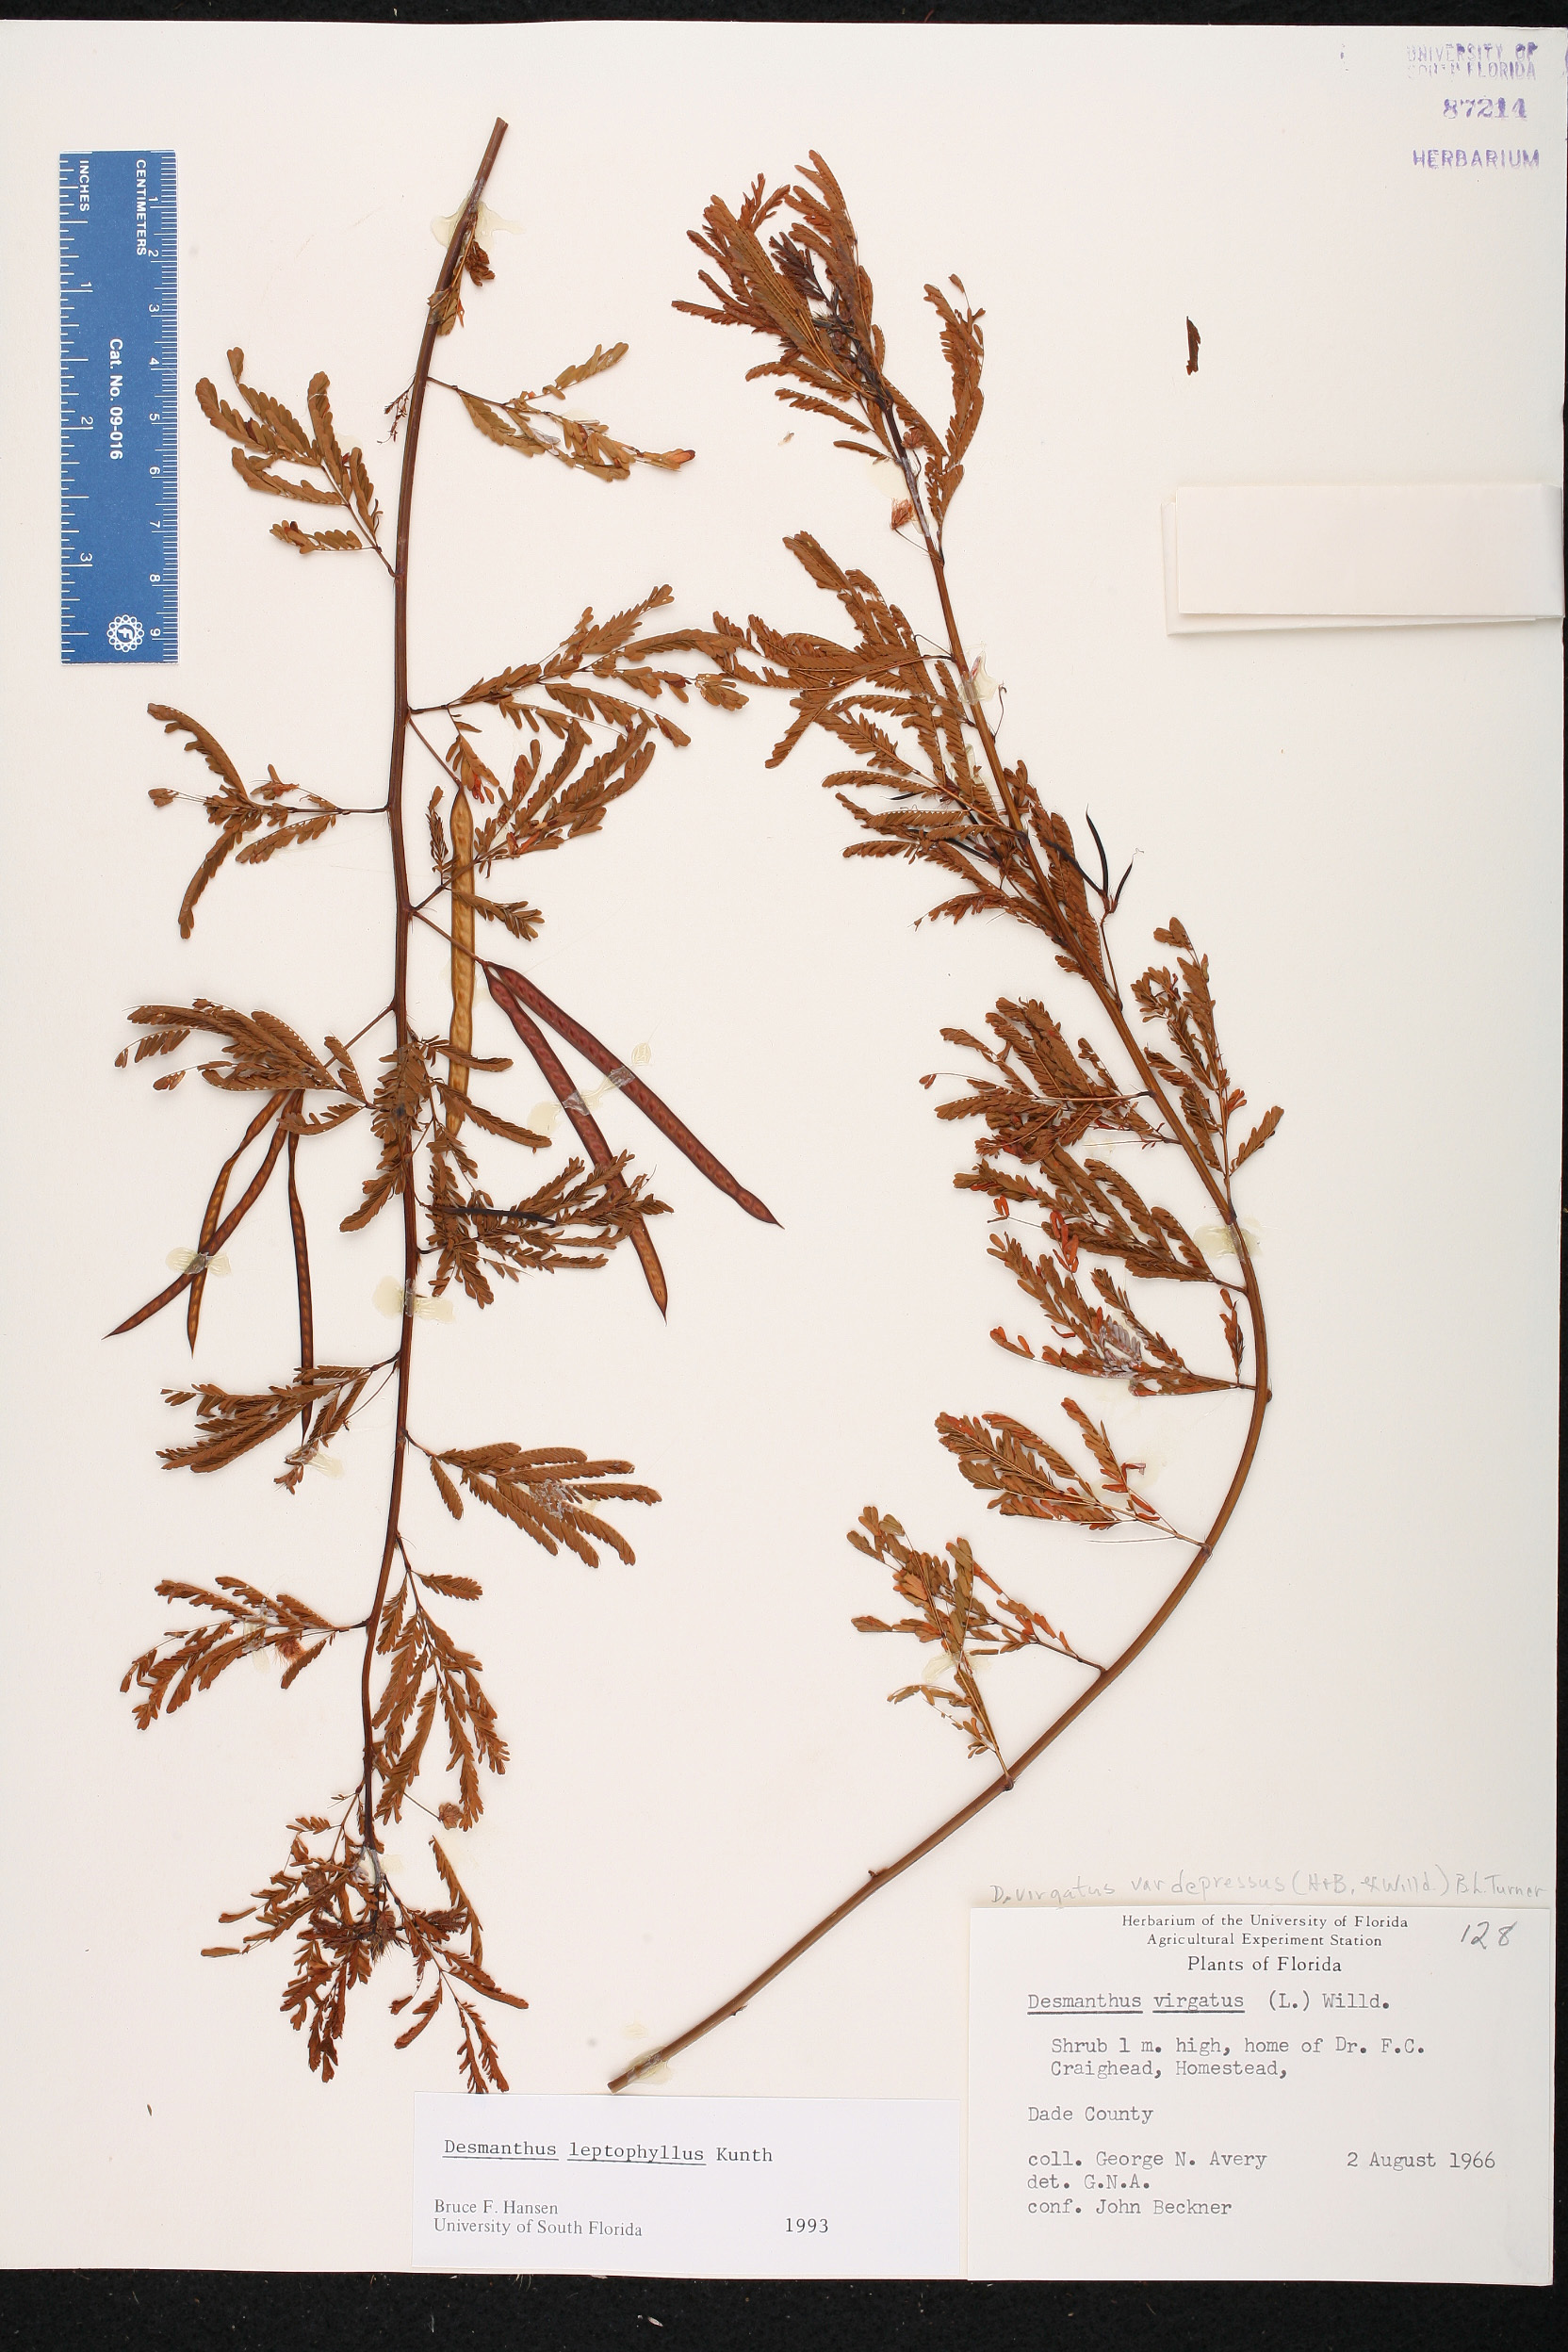 Herbarium record of a dried stem with leaves and died legumes